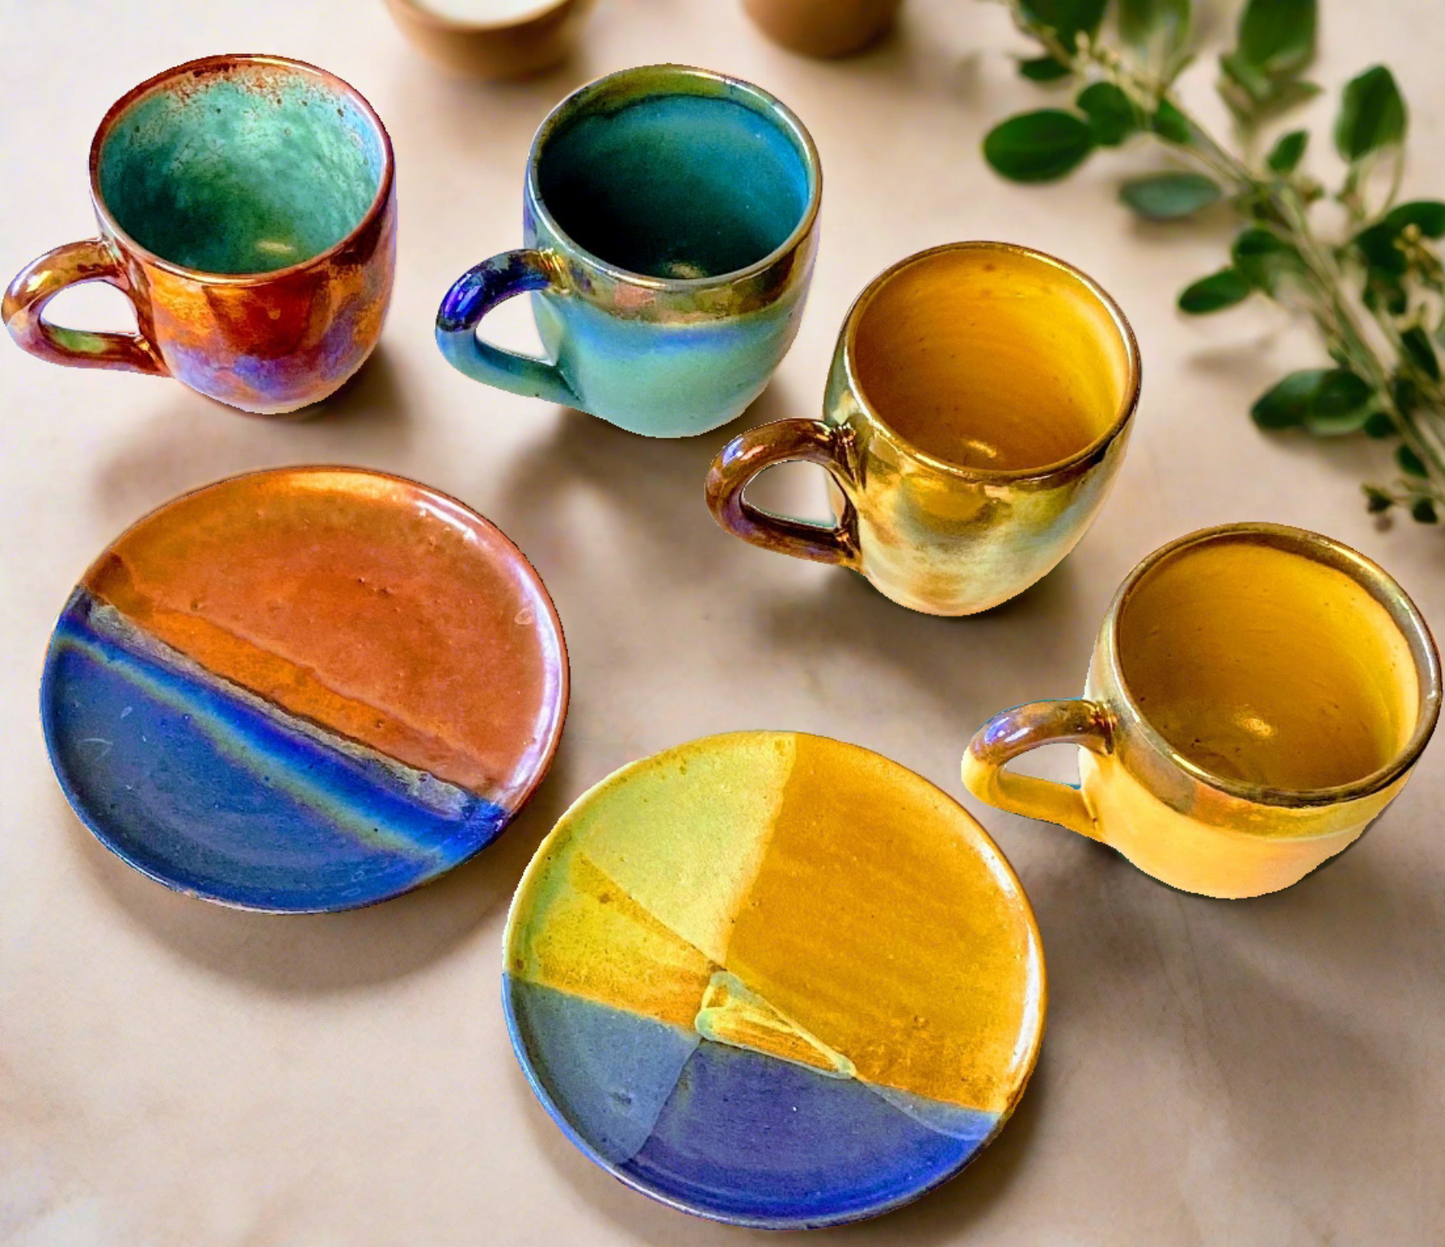 Exquisite Ceramic Cups from the Nile